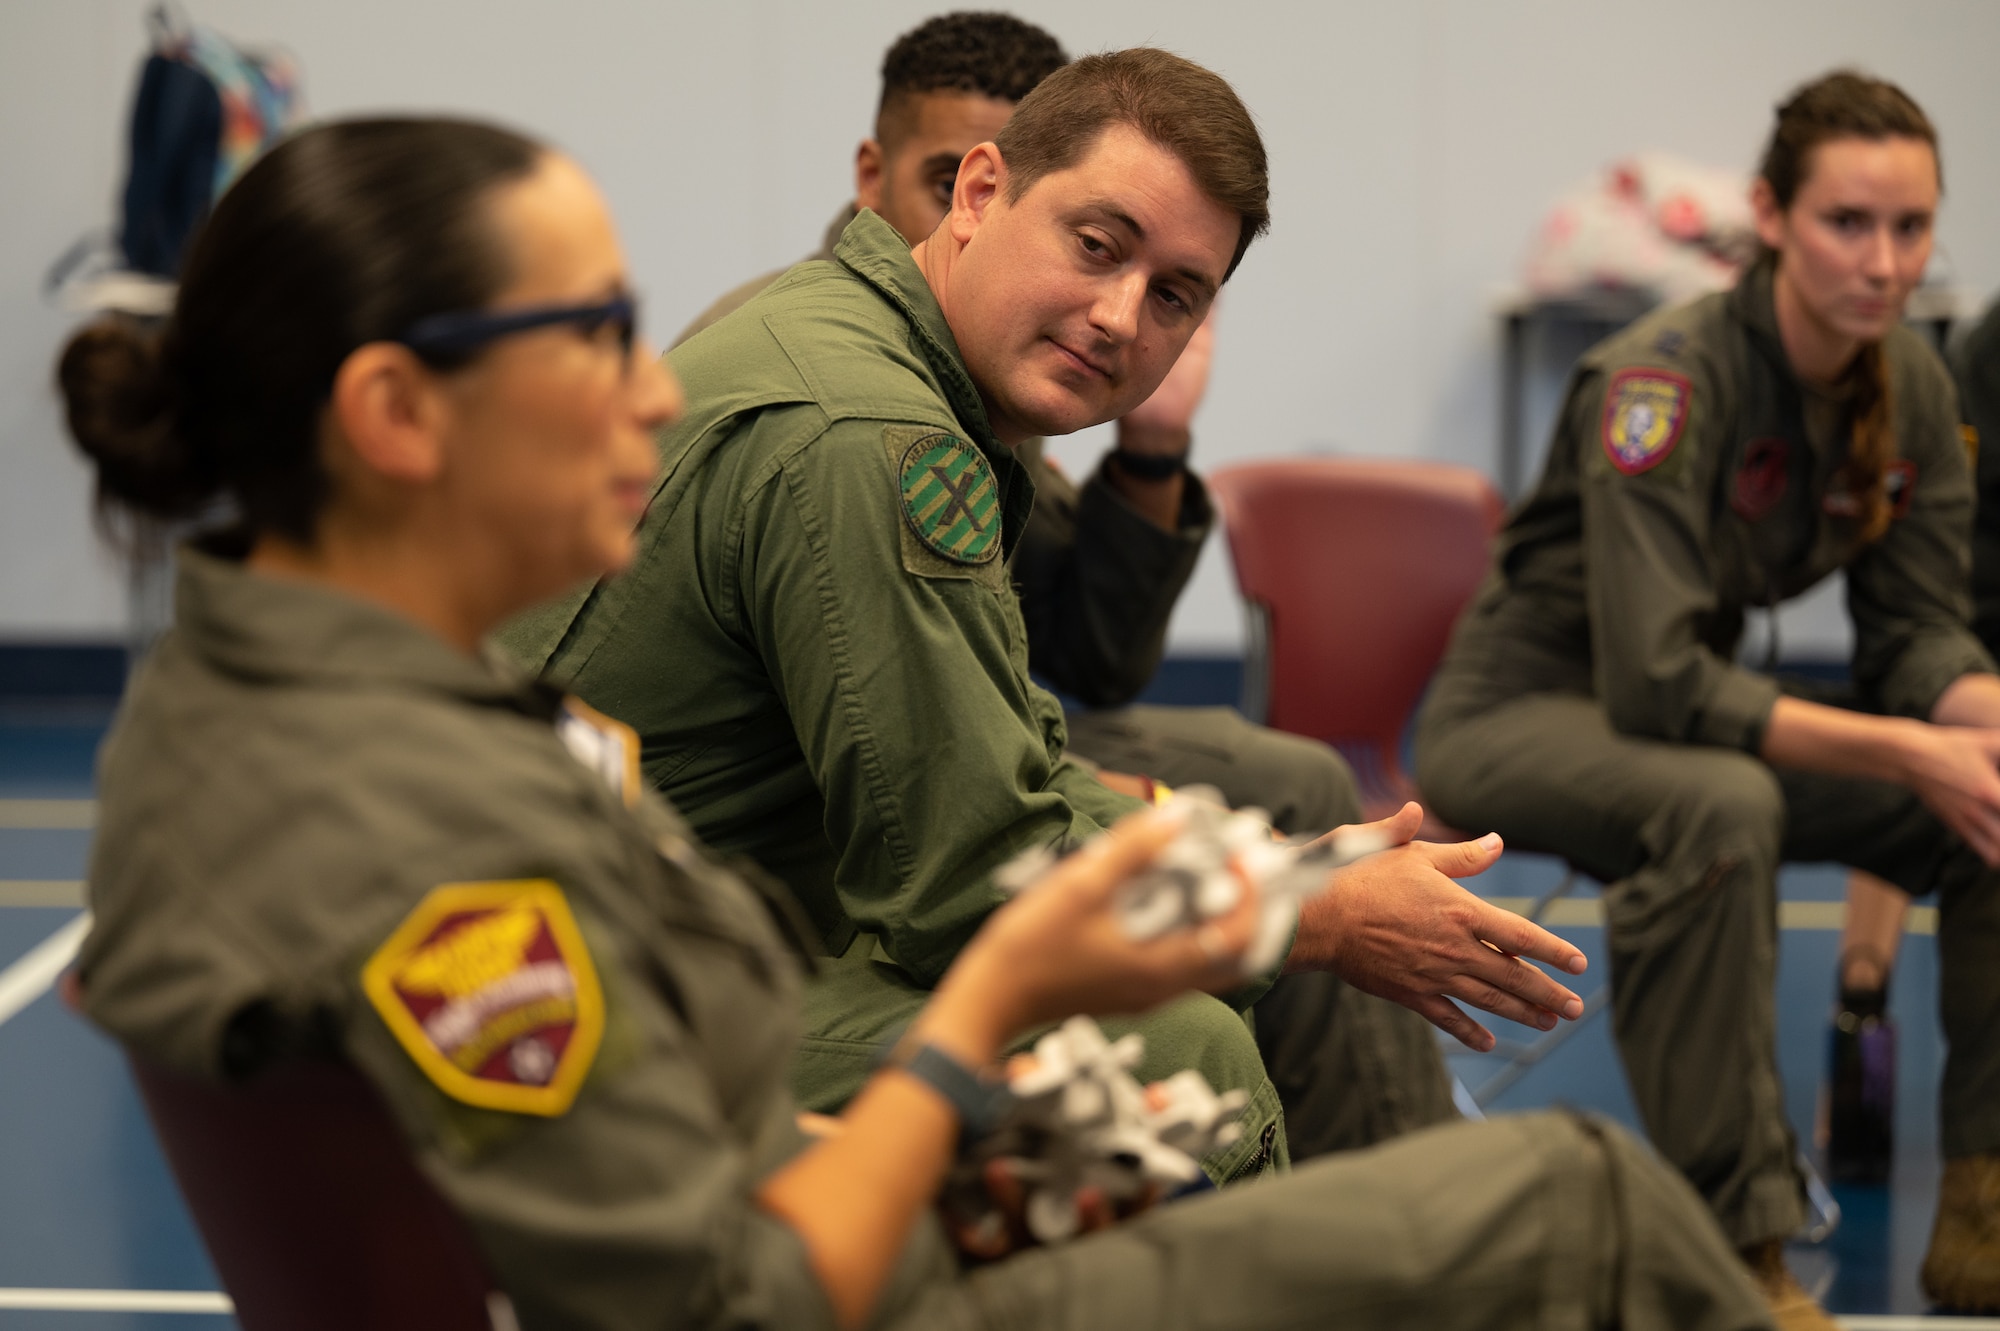 Air Force Aviation Inspiration and Mentors (AIM) and a sponsoring AIM wing visited youth at Johnson Youth Center in Juneau, Alaska, from Sept. 5 to 7 during an Alaska-based recruiting zone blitz.